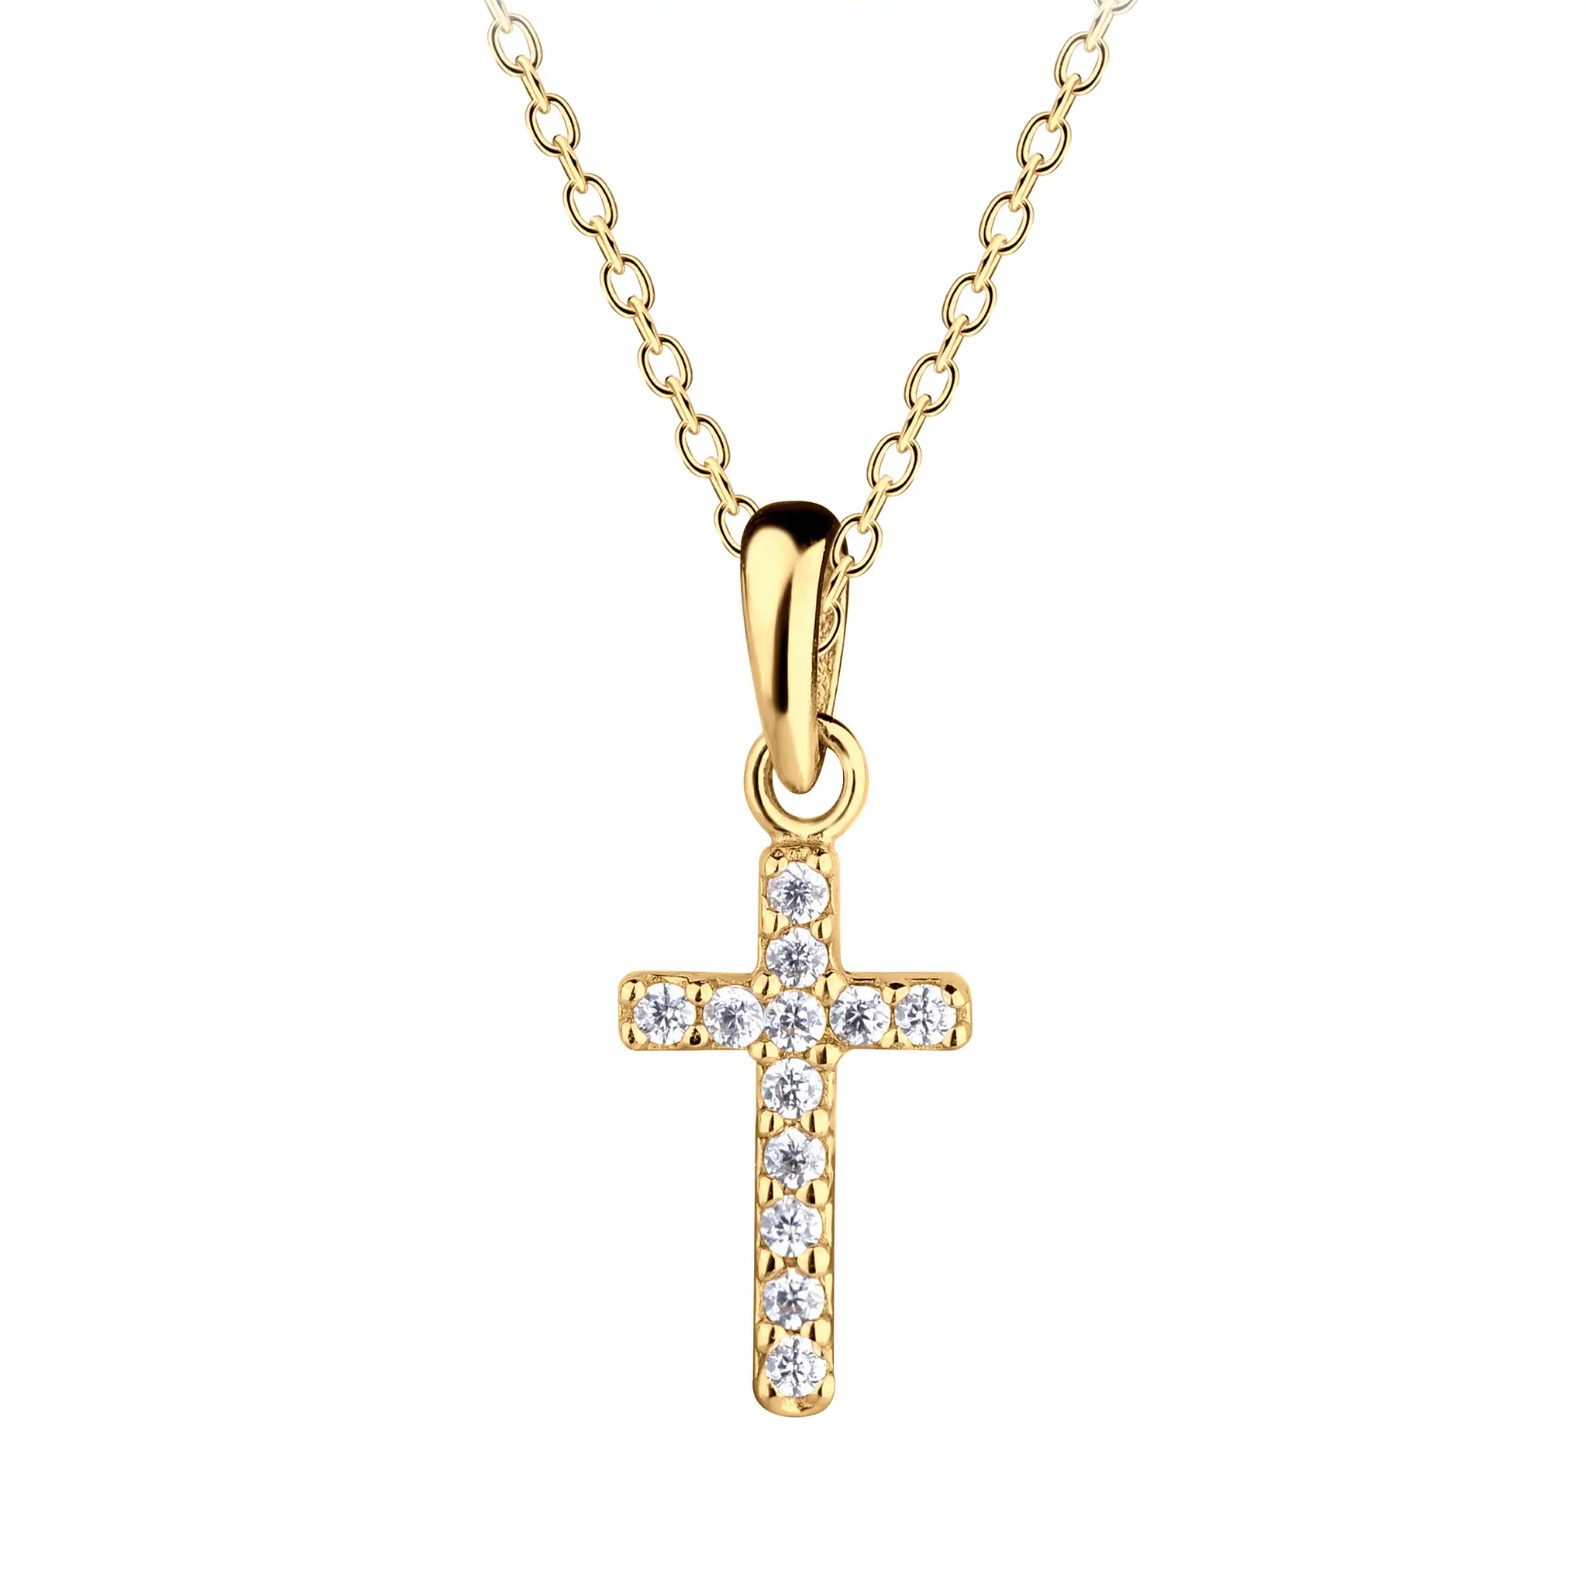 Girls 14K Gold Plated CZ Cross Necklace